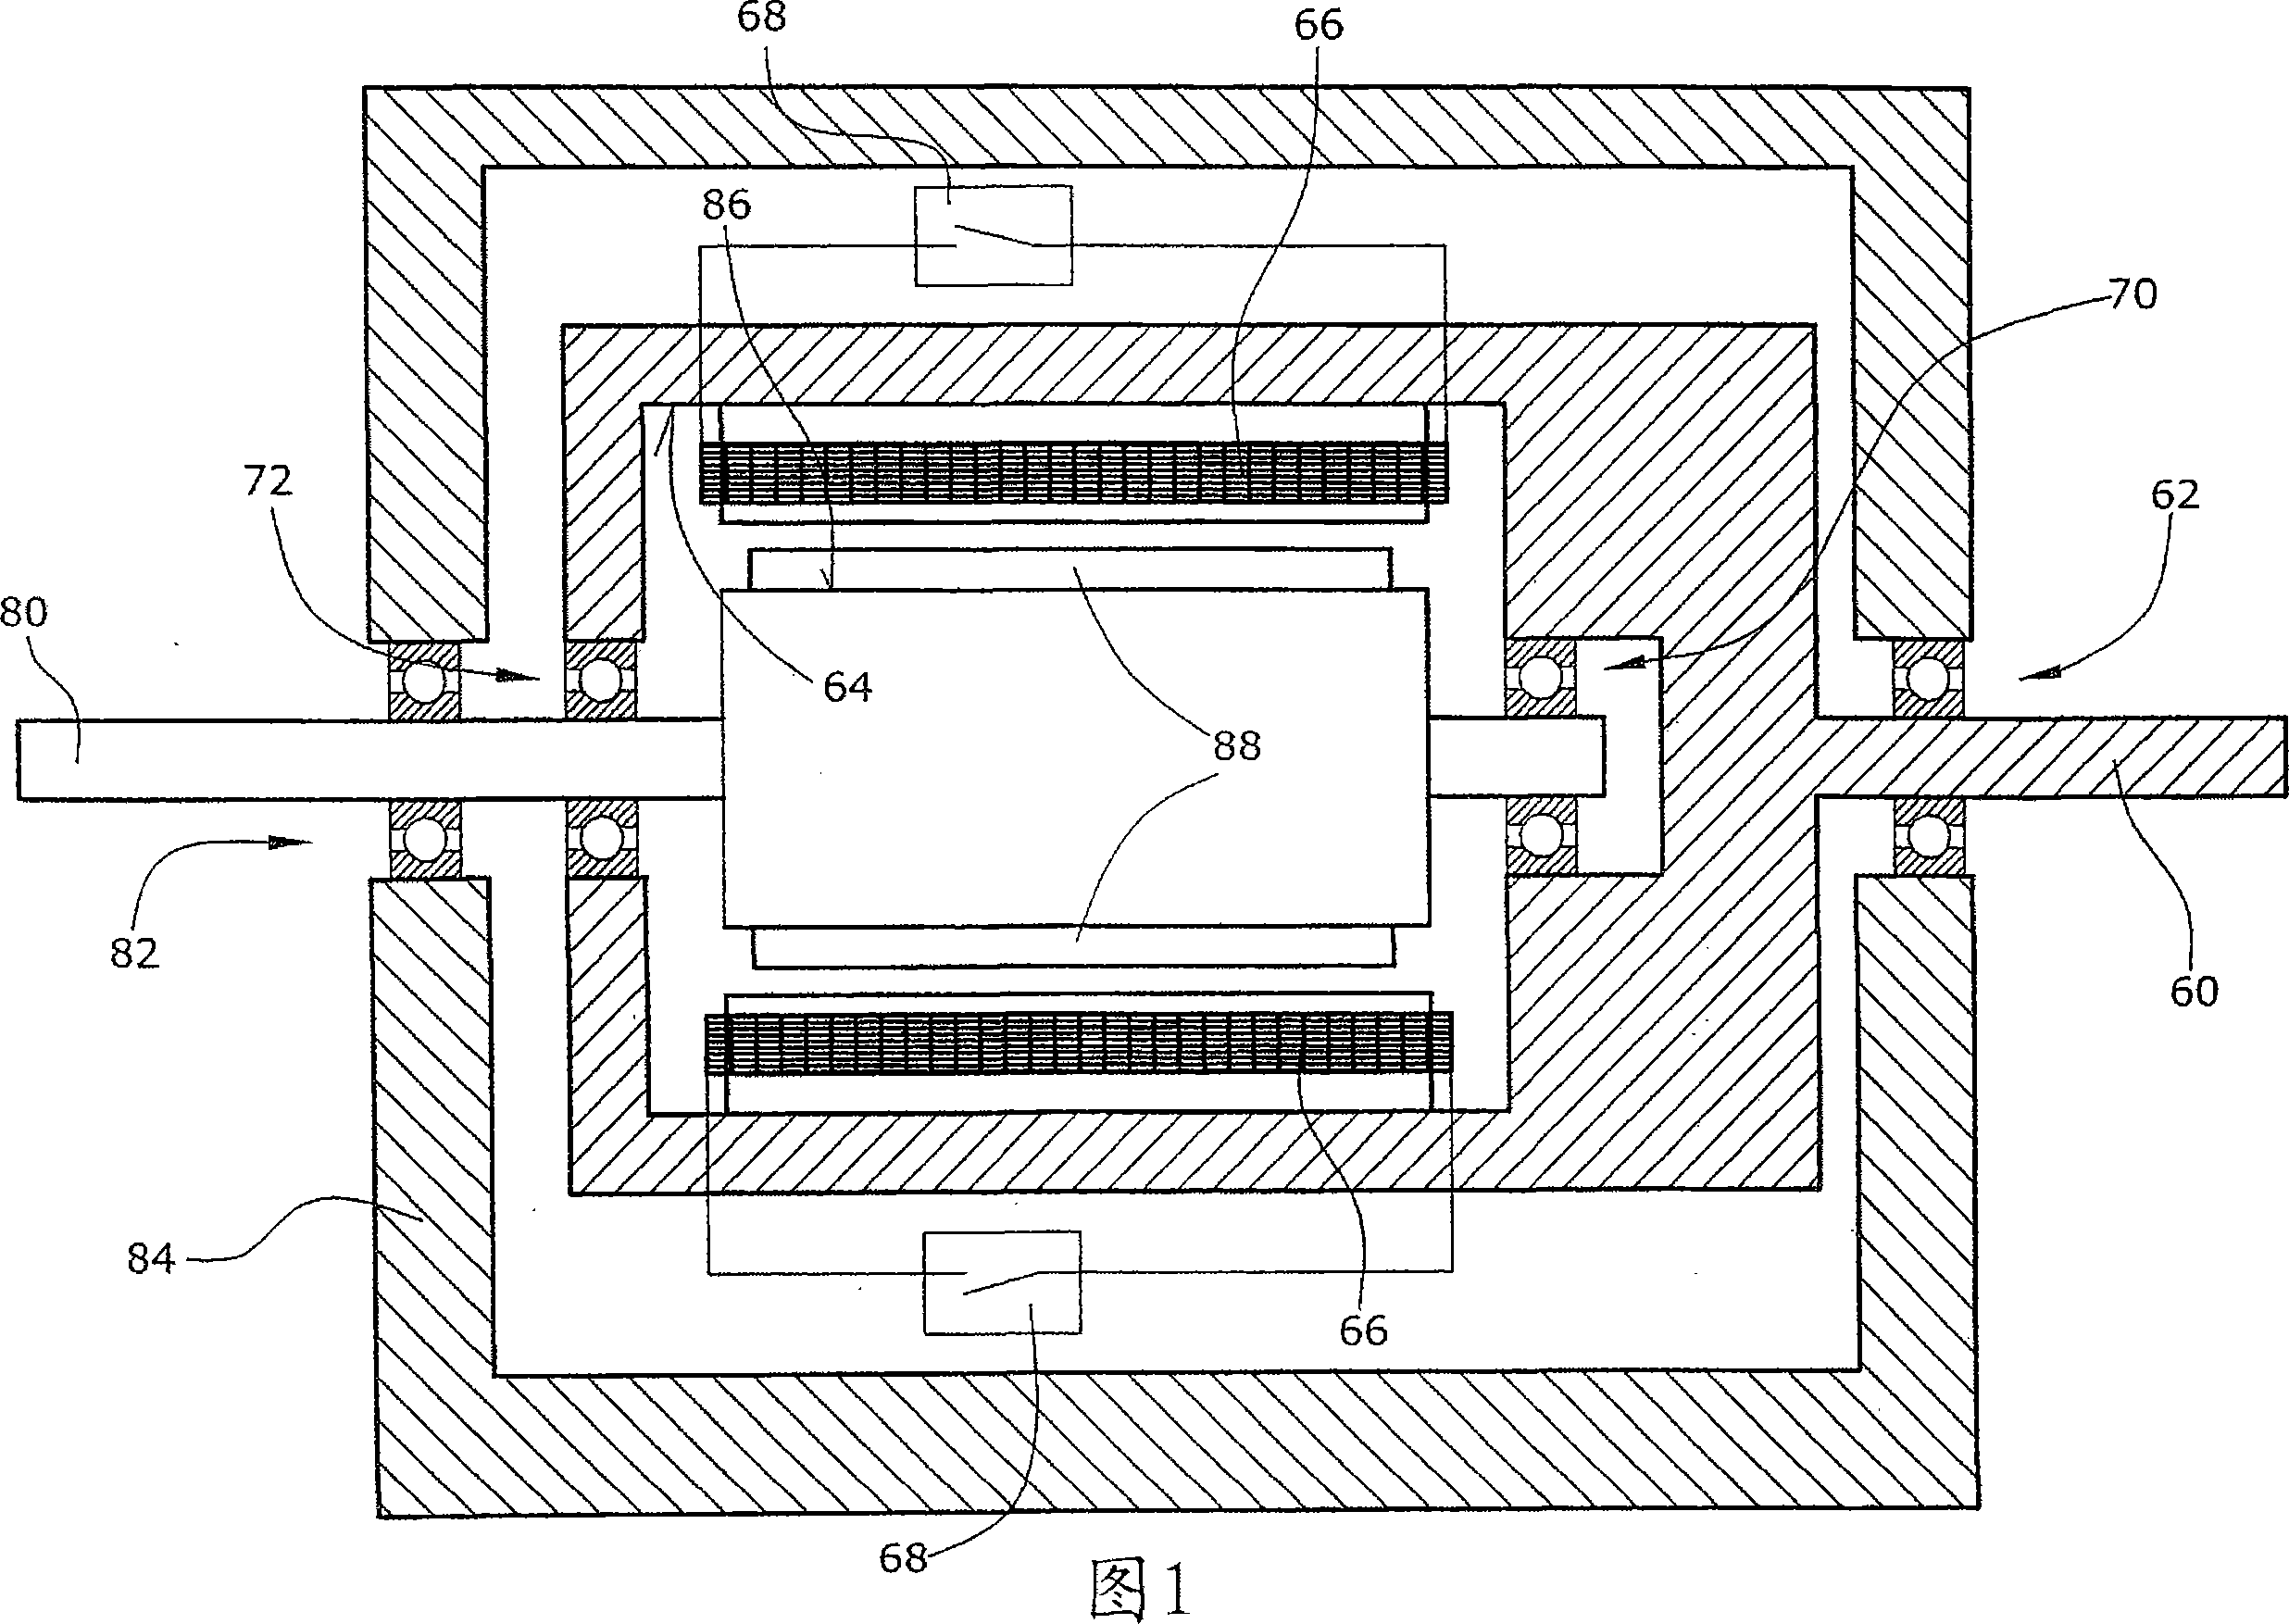 Electrical gearbox with continuous variation